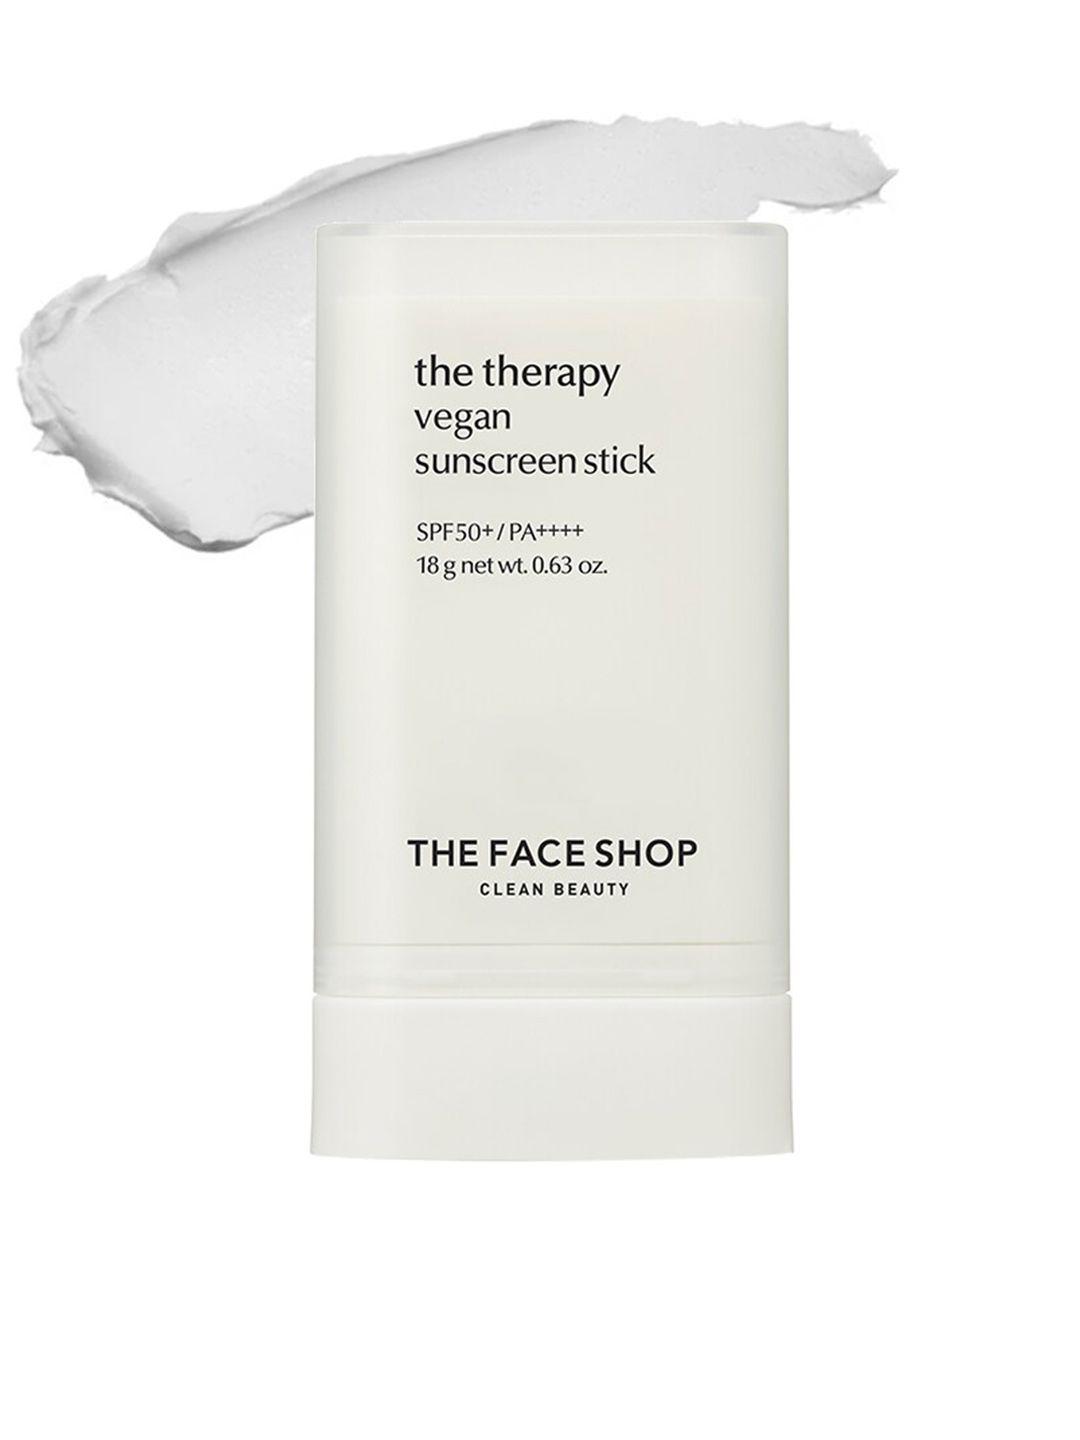 the-face-shop-the-therapy-vegan-sunscreen-stick-spf50+---18g